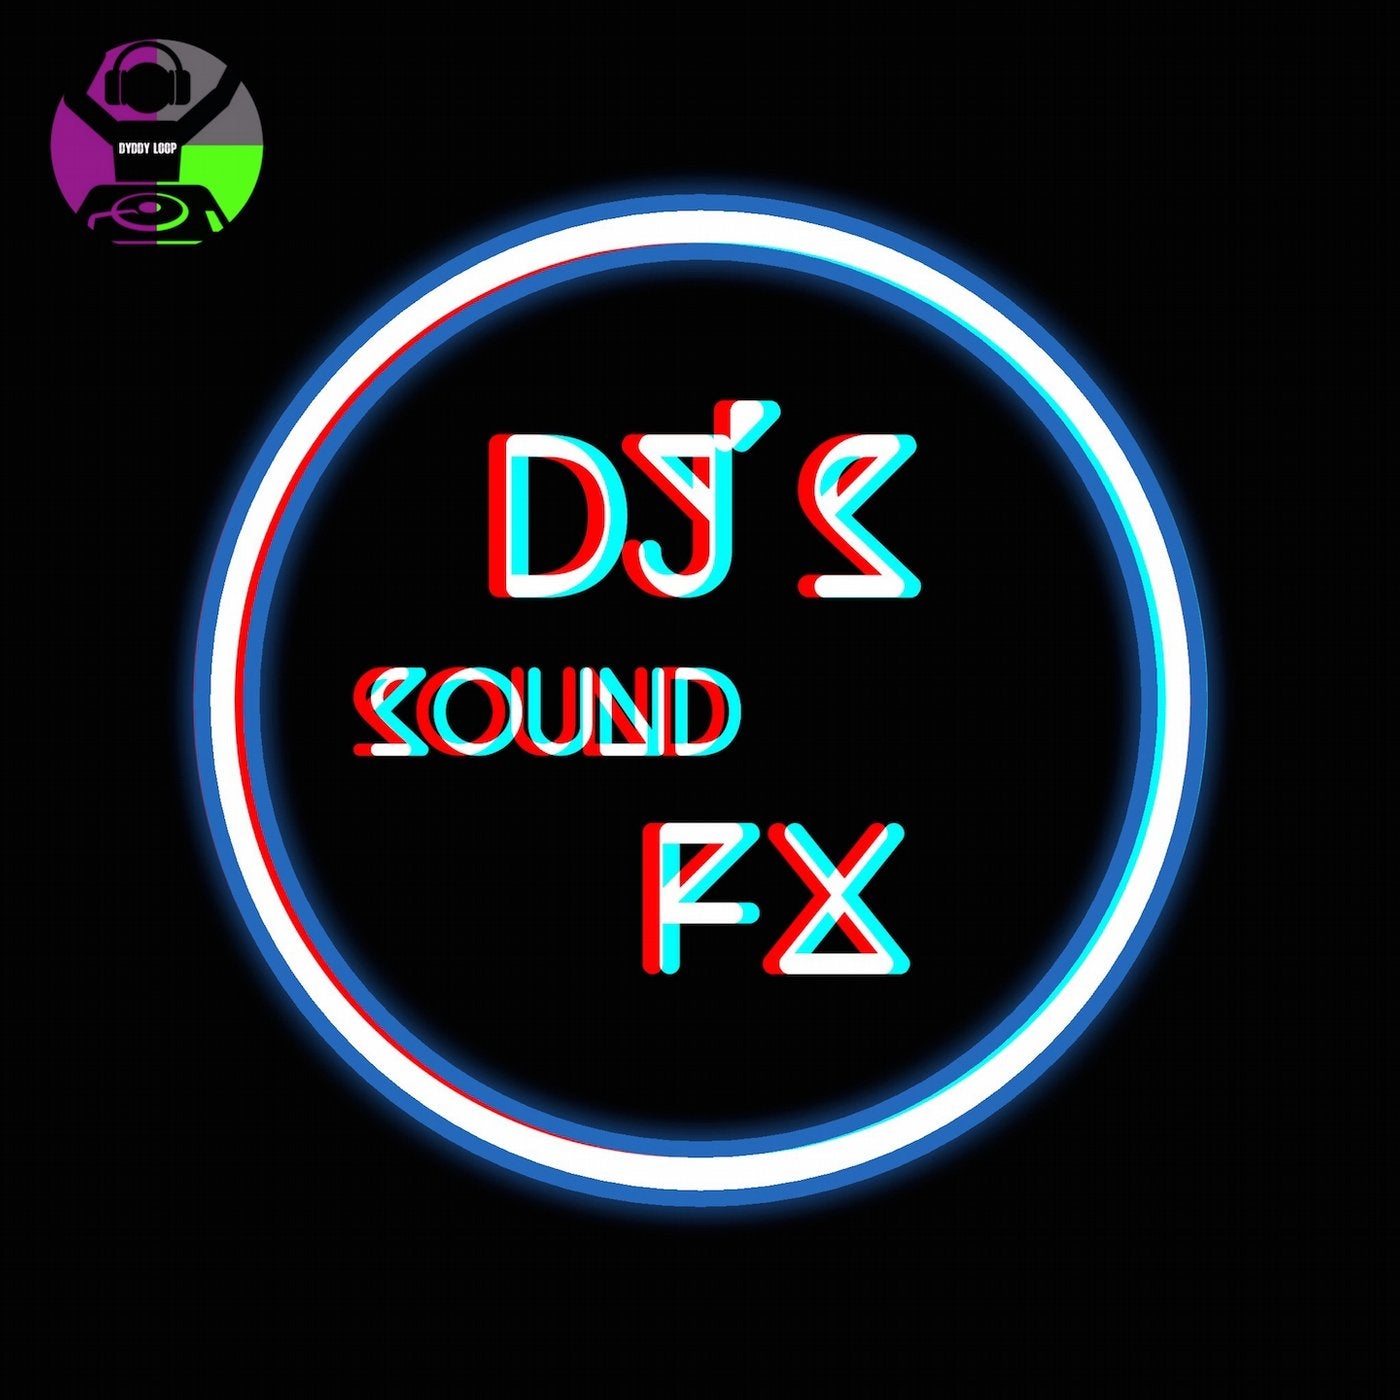 Only loops. FXSOUND.